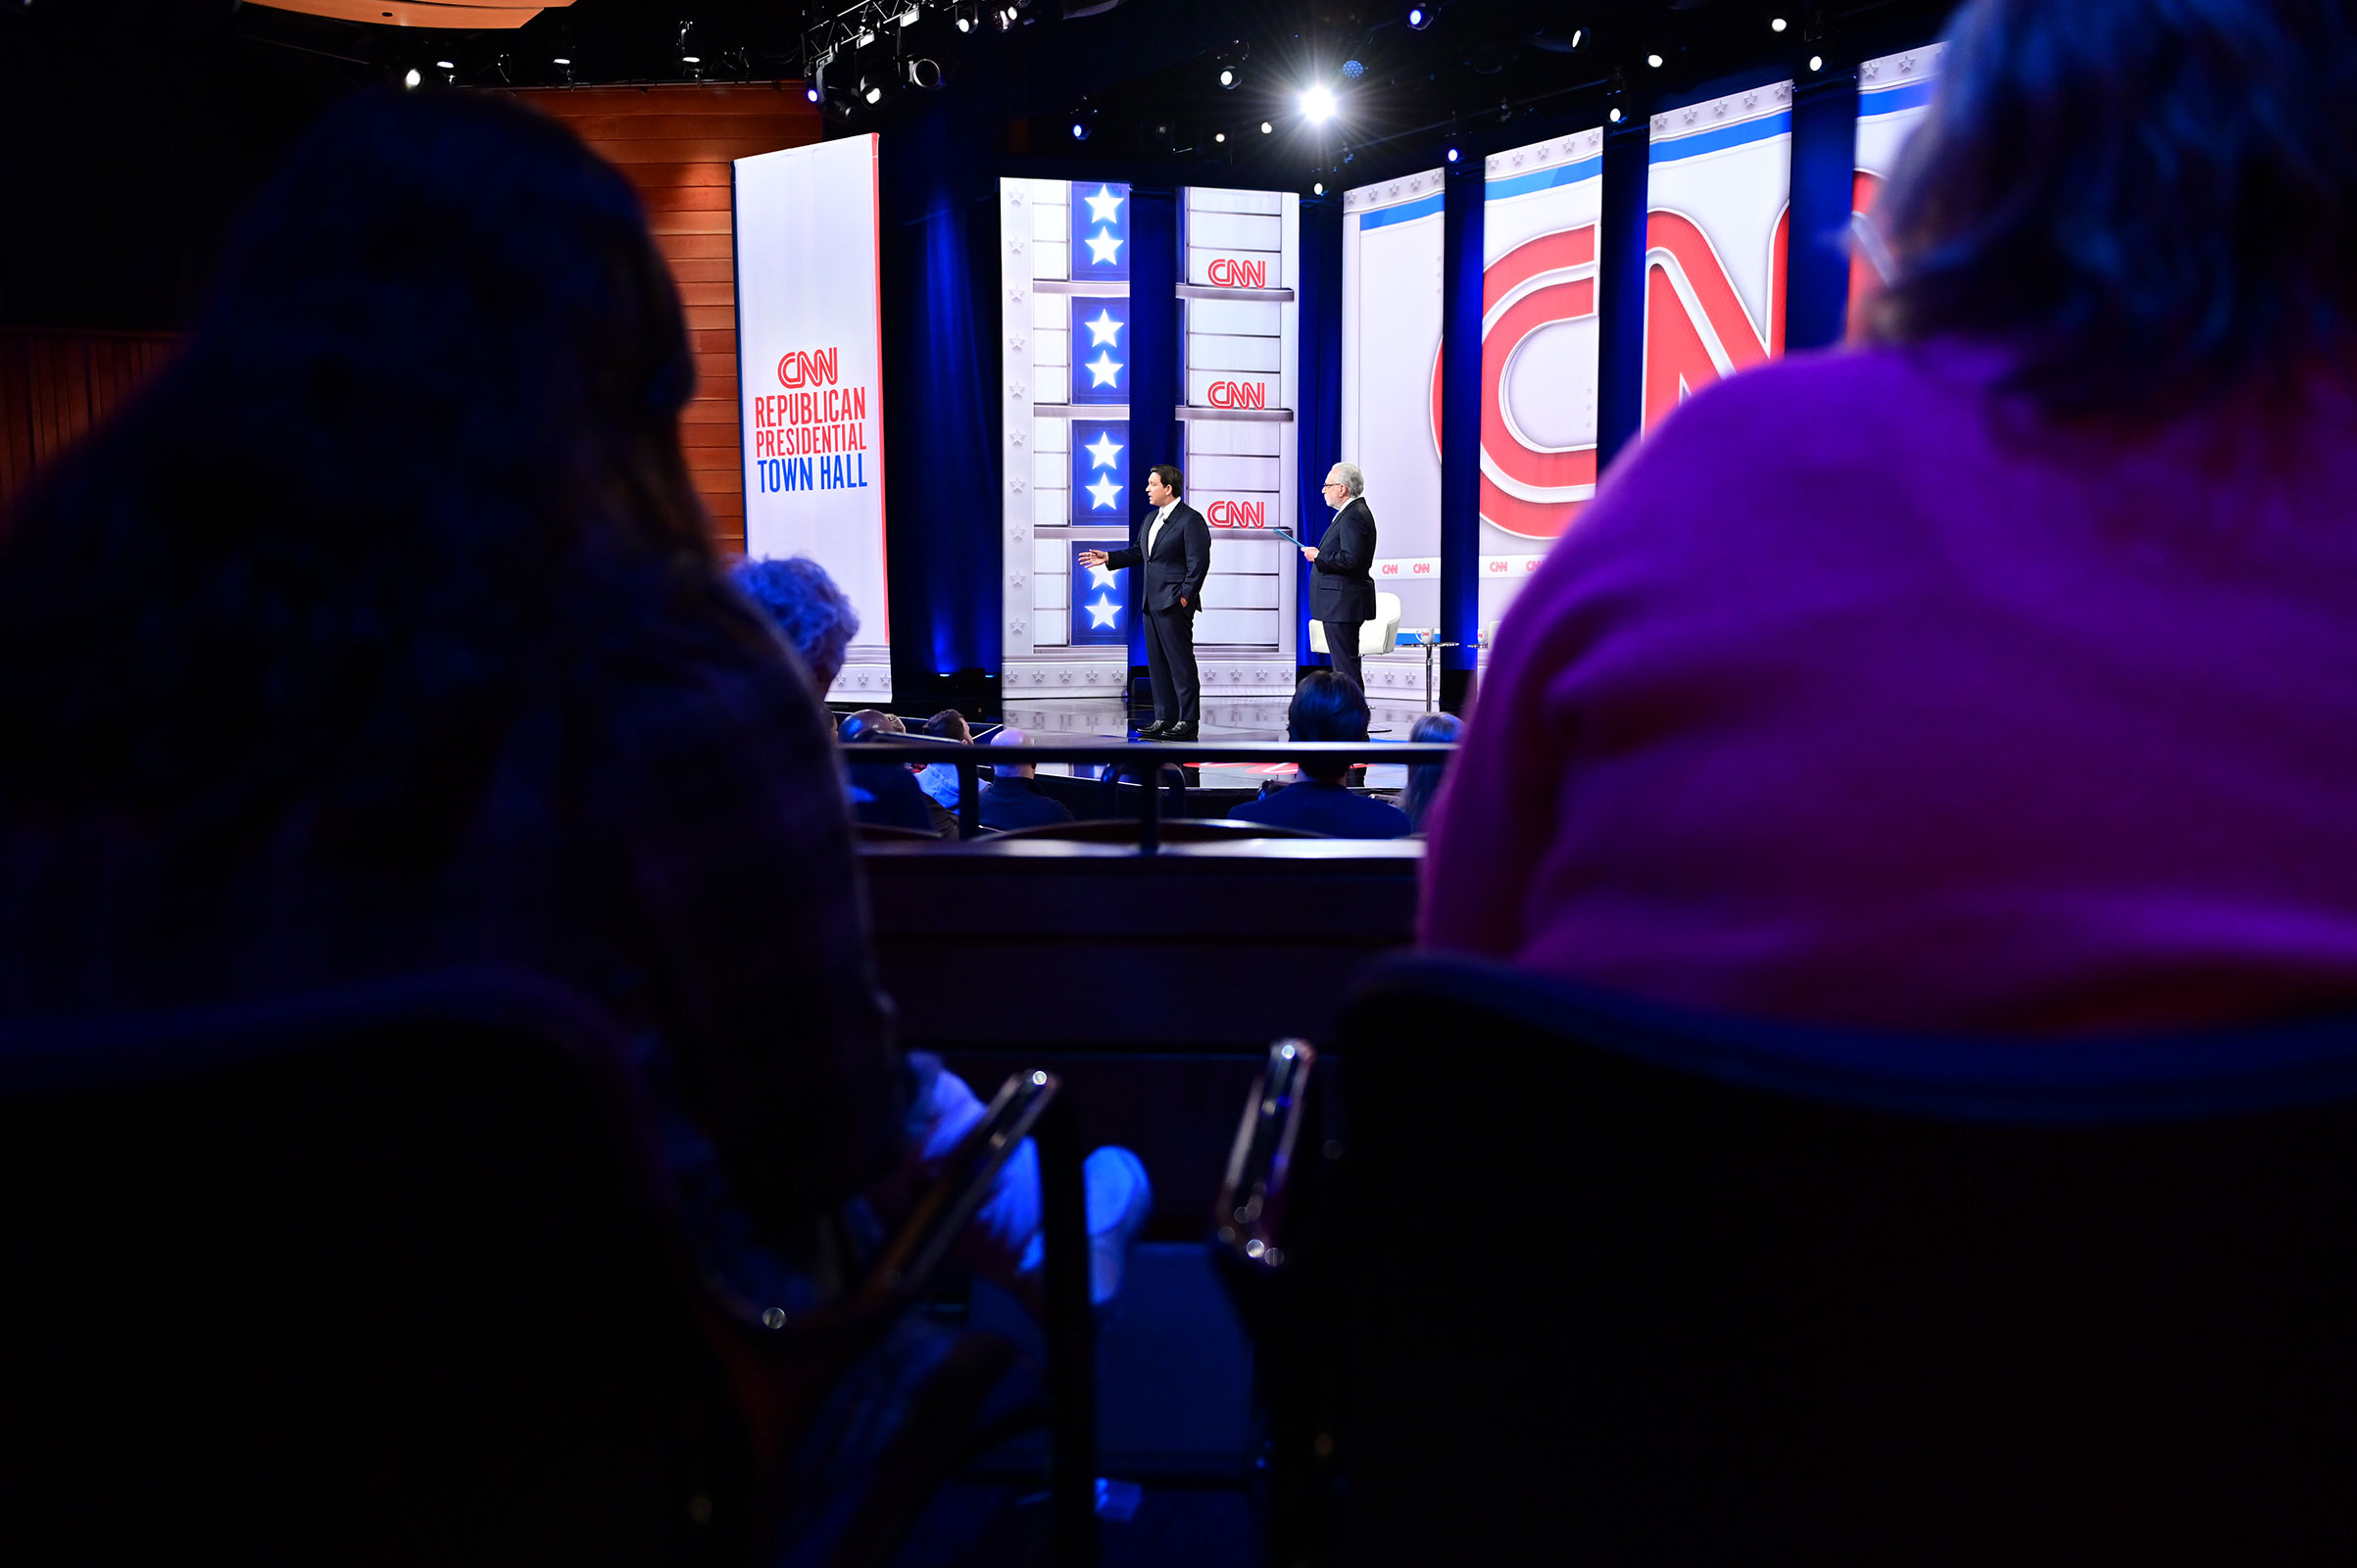 Florida Gov. Ron DeSantis answers a question during a CNN Republican Presidential Town Hall on Tuesday in New Hampshire.